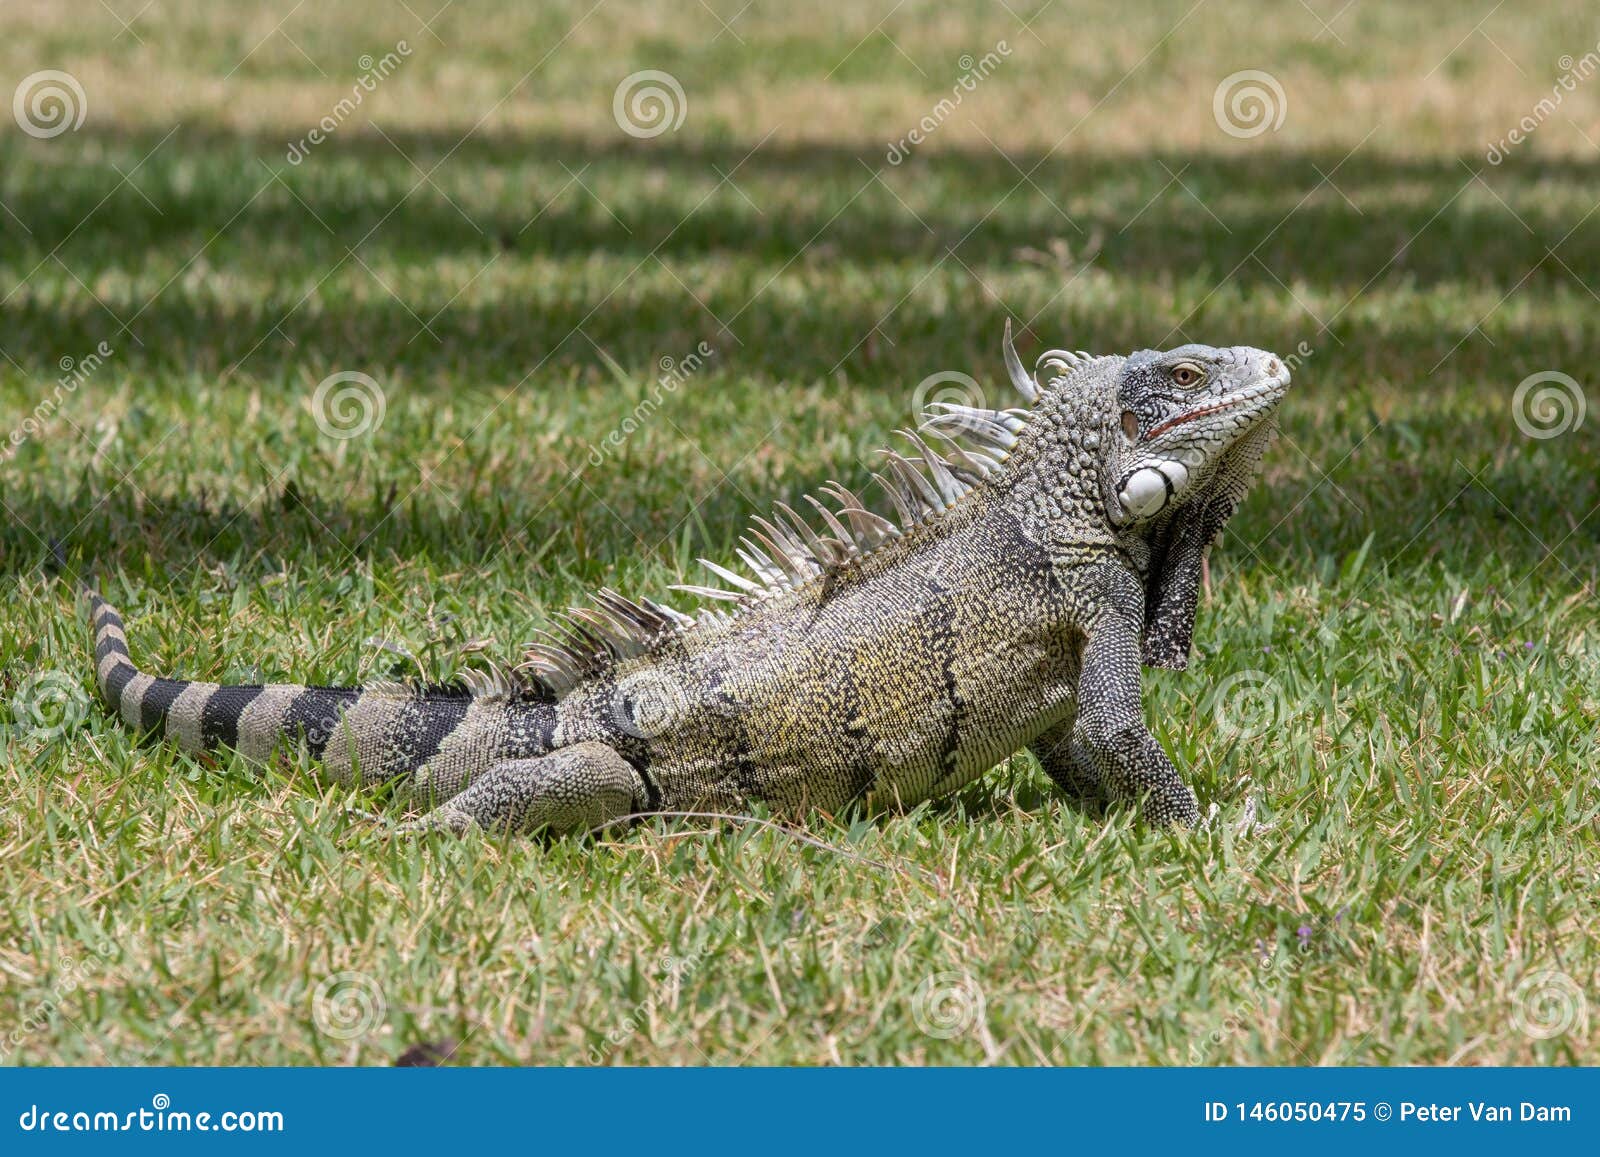 a green iguana posing in the grass in curacao